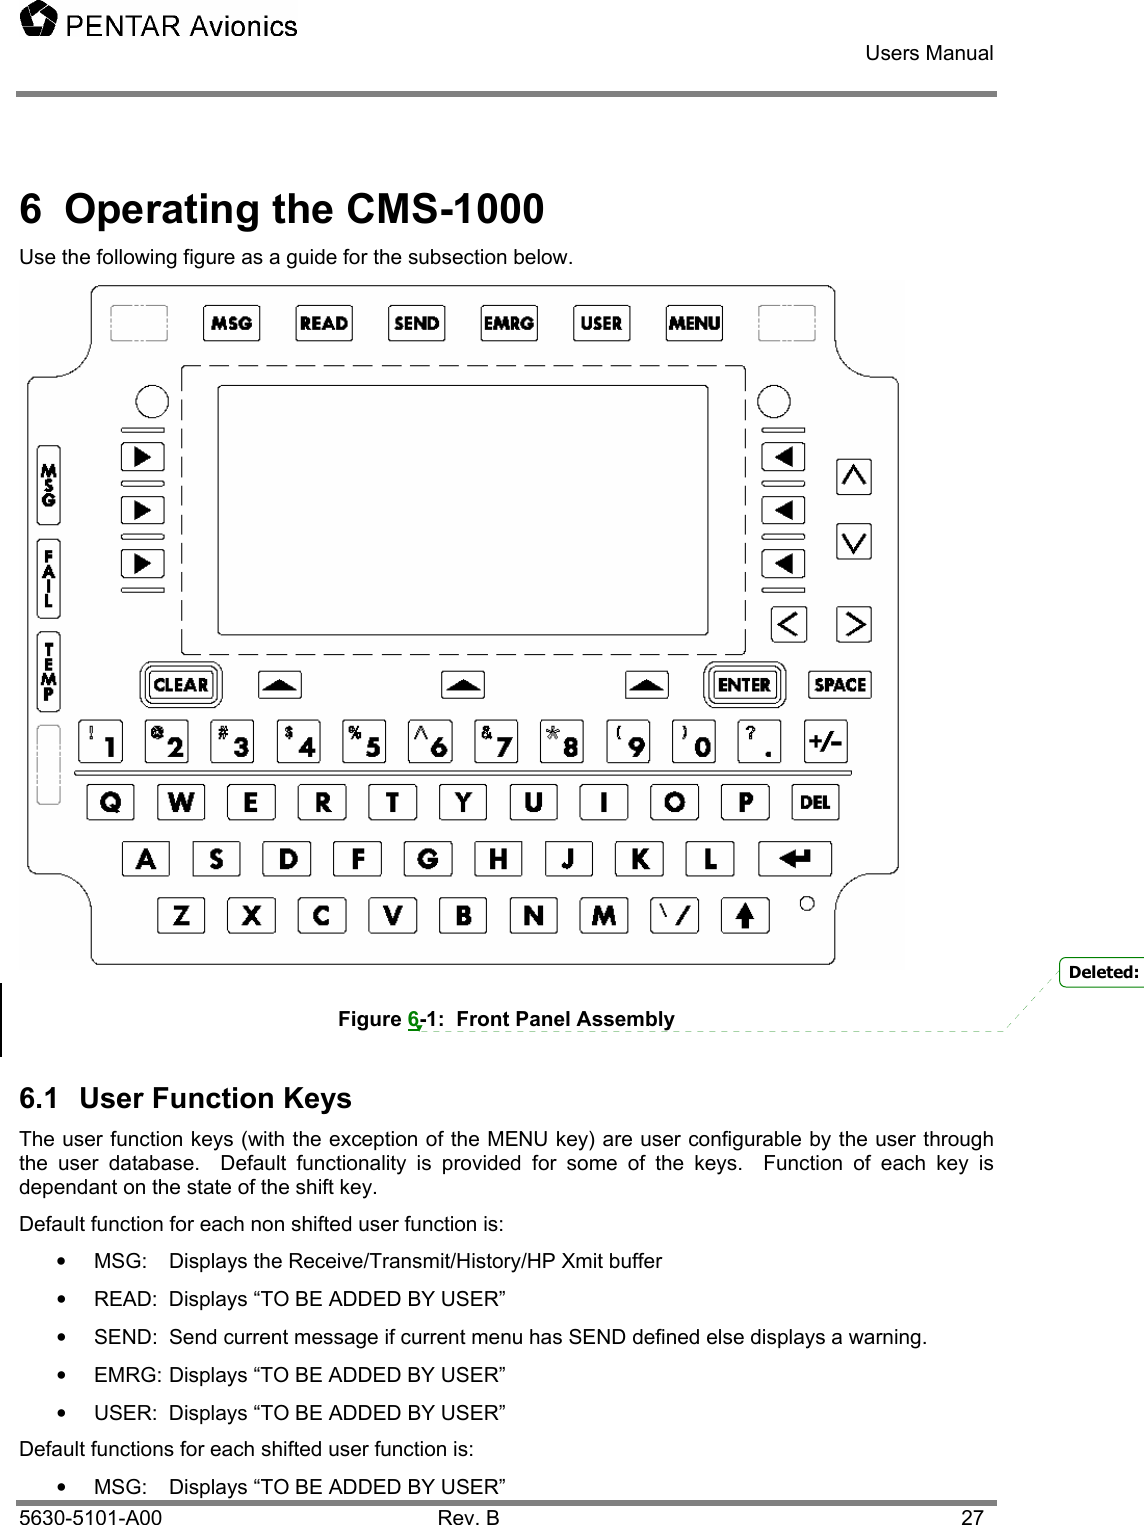    Users Manual    5630-5101-A00 Rev. B  27 6  Operating the CMS-1000 Use the following figure as a guide for the subsection below.  Figure 6-1:  Front Panel Assembly 6.1  User Function Keys The user function keys (with the exception of the MENU key) are user configurable by the user through the user database.  Default functionality is provided for some of the keys.  Function of each key is dependant on the state of the shift key. Default function for each non shifted user function is: • MSG: Displays the Receive/Transmit/History/HP Xmit buffer •  READ:  Displays “TO BE ADDED BY USER” •  SEND:  Send current message if current menu has SEND defined else displays a warning. •  EMRG: Displays “TO BE ADDED BY USER” •  USER:  Displays “TO BE ADDED BY USER” Default functions for each shifted user function is: •  MSG:  Displays “TO BE ADDED BY USER” Deleted: 